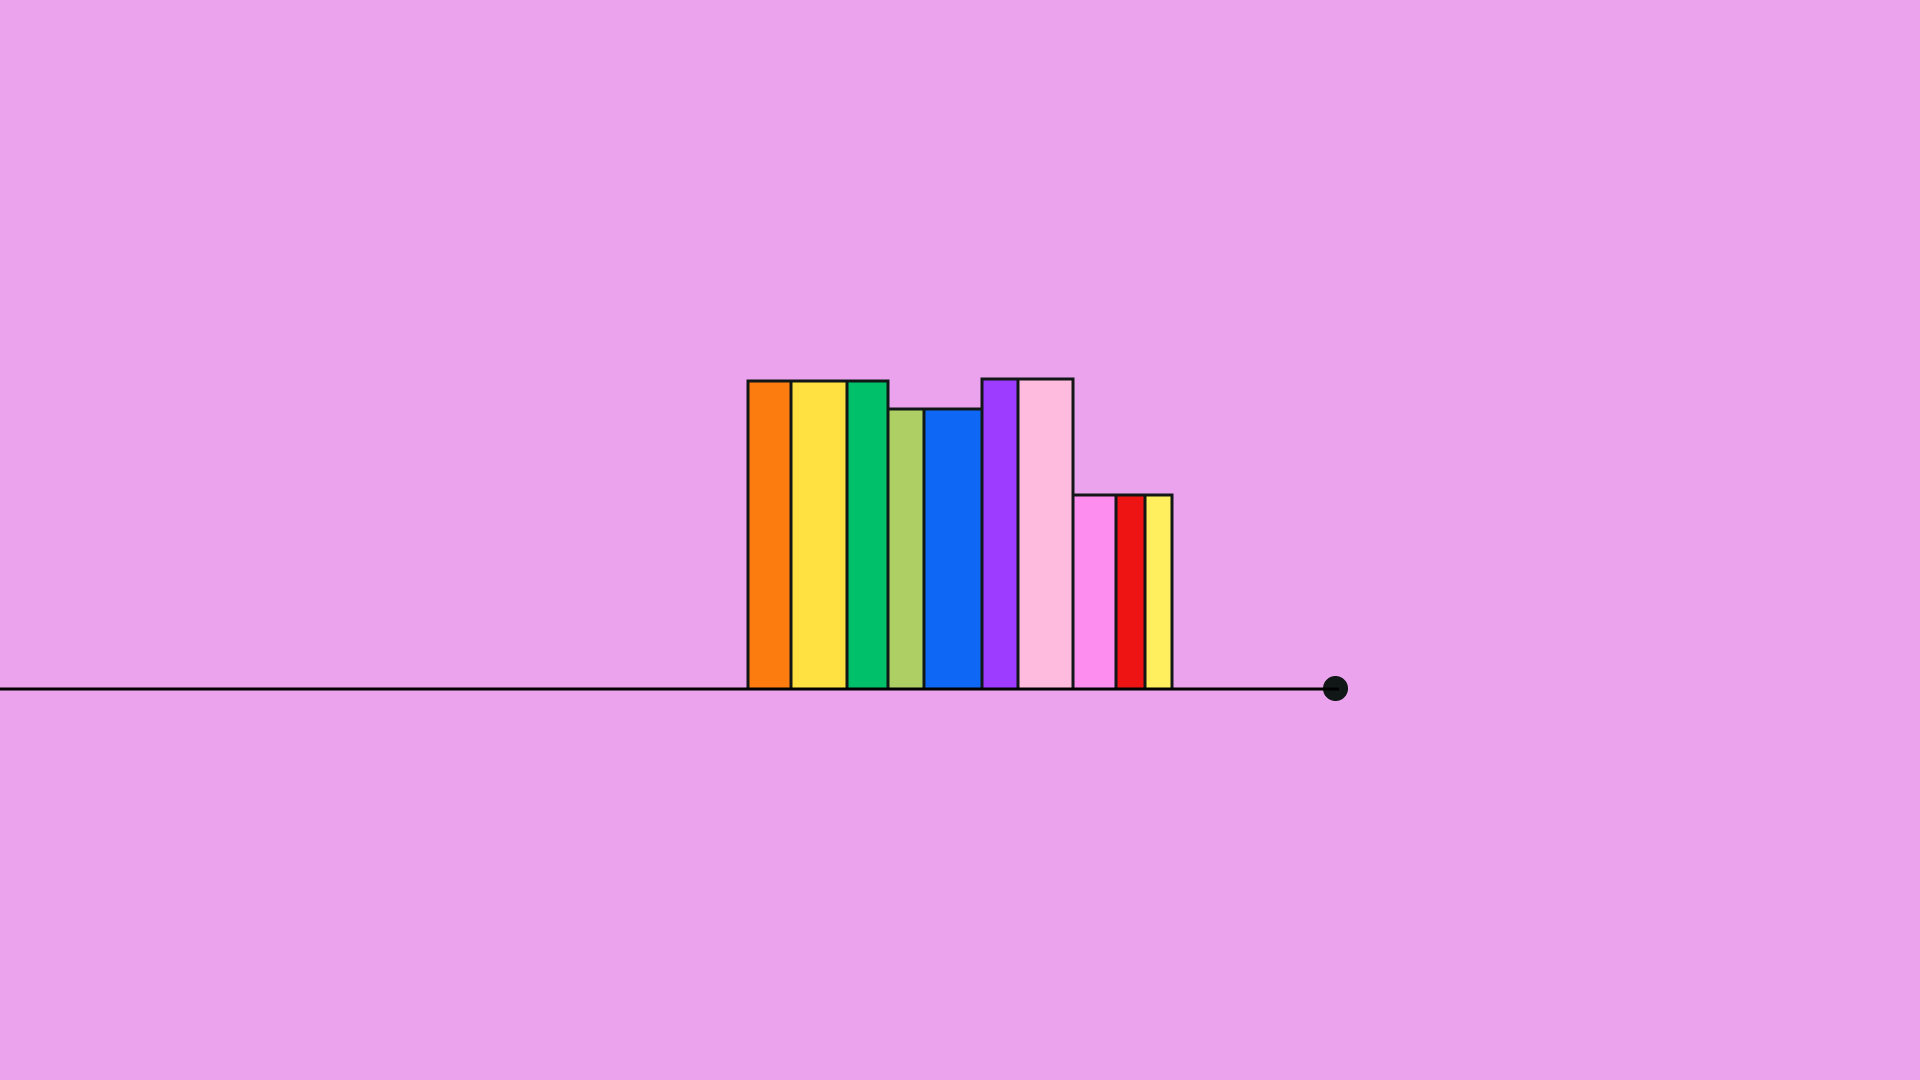 10 essential color theory books for graphic designers and artists | Linearity